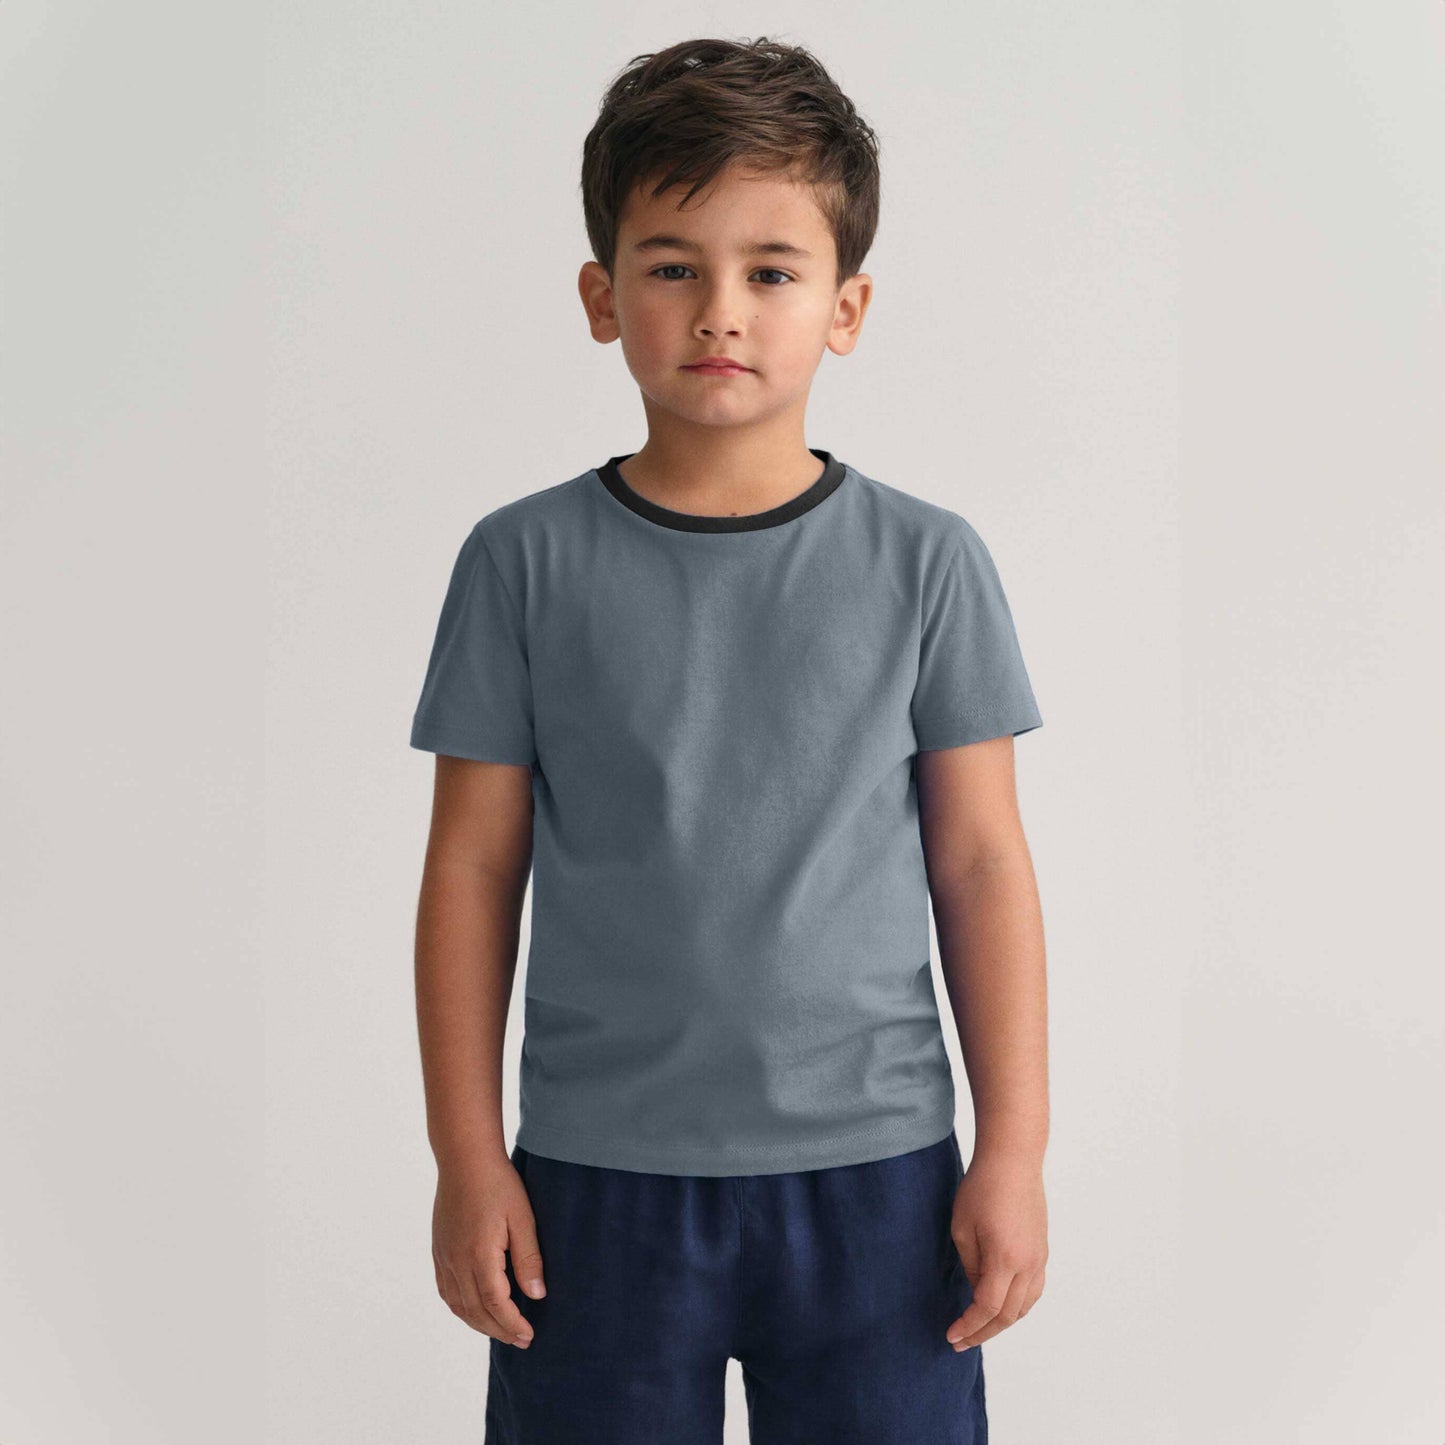 Polo Republica Kid's Contrast Neck Minor Fault Tee Shirt Kid's Tee Shirt Polo Republica Steel Blue 3-4 Years 